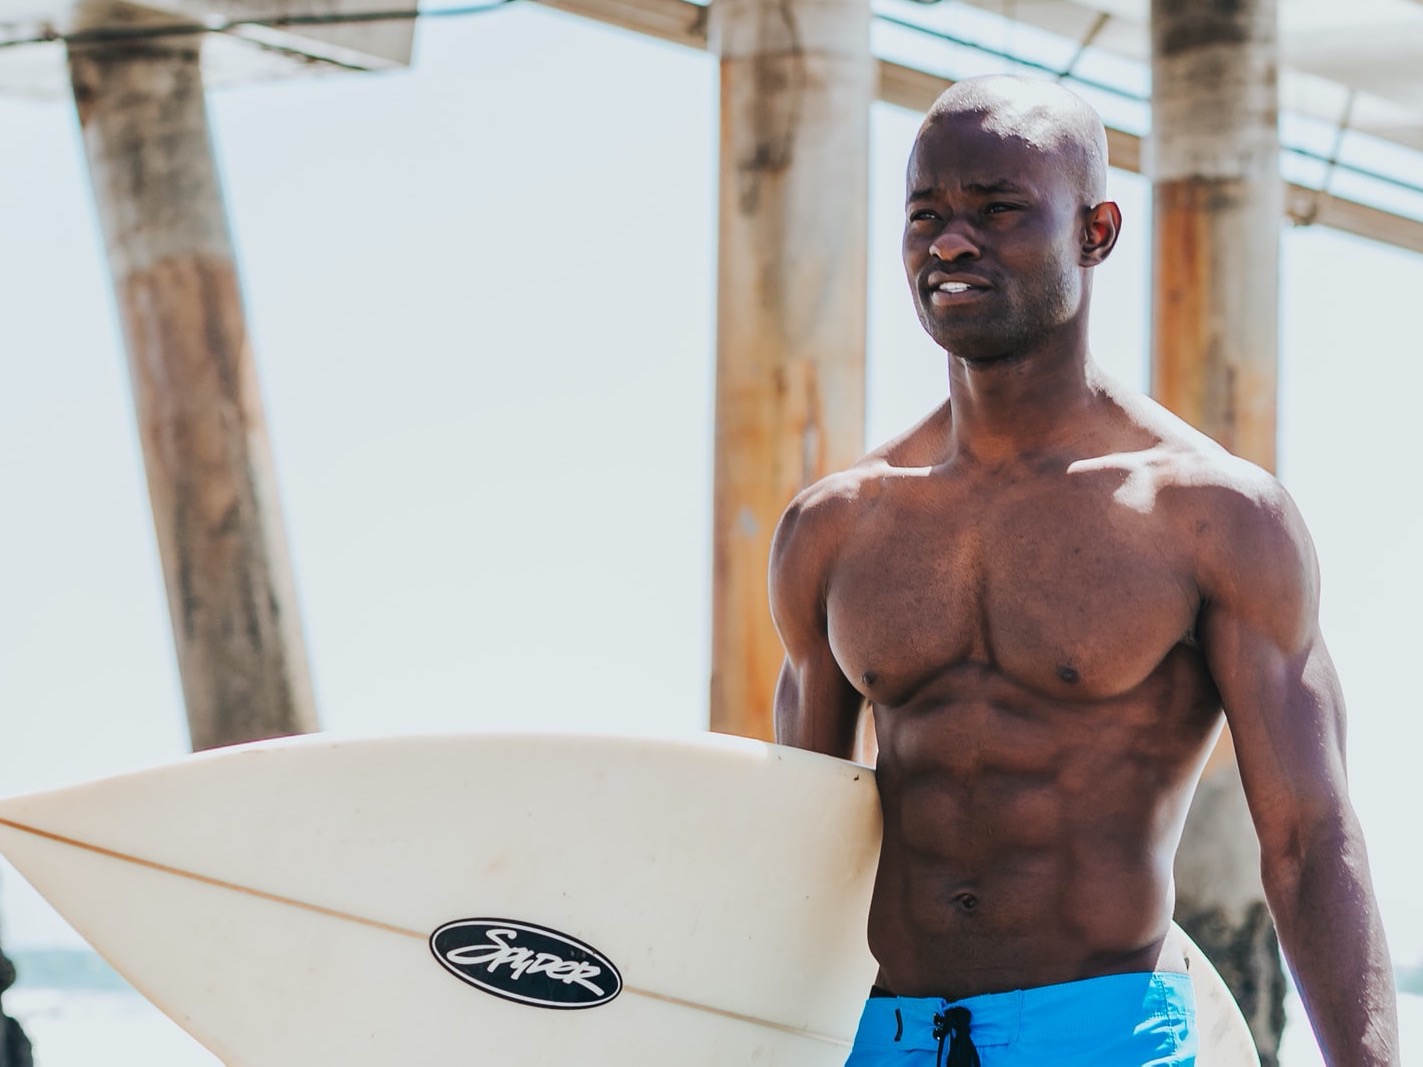 Shirtless surfer carrying surfboard